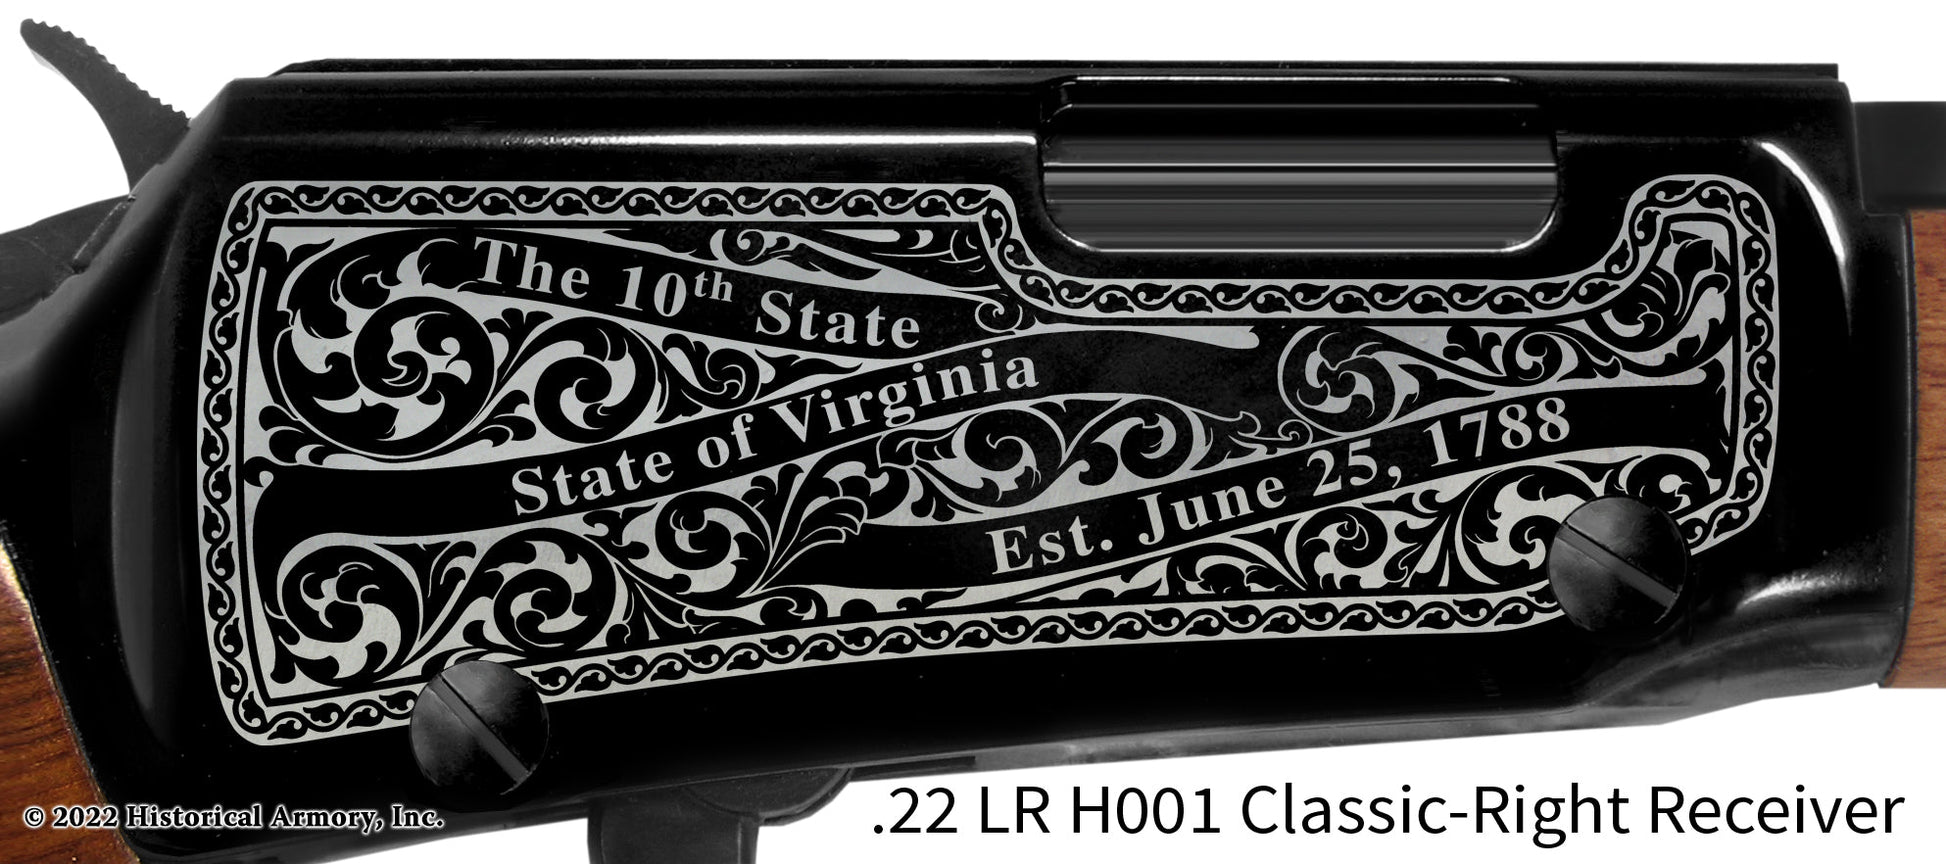 Alleghany County Virginia Engraved Henry H001 Rifle